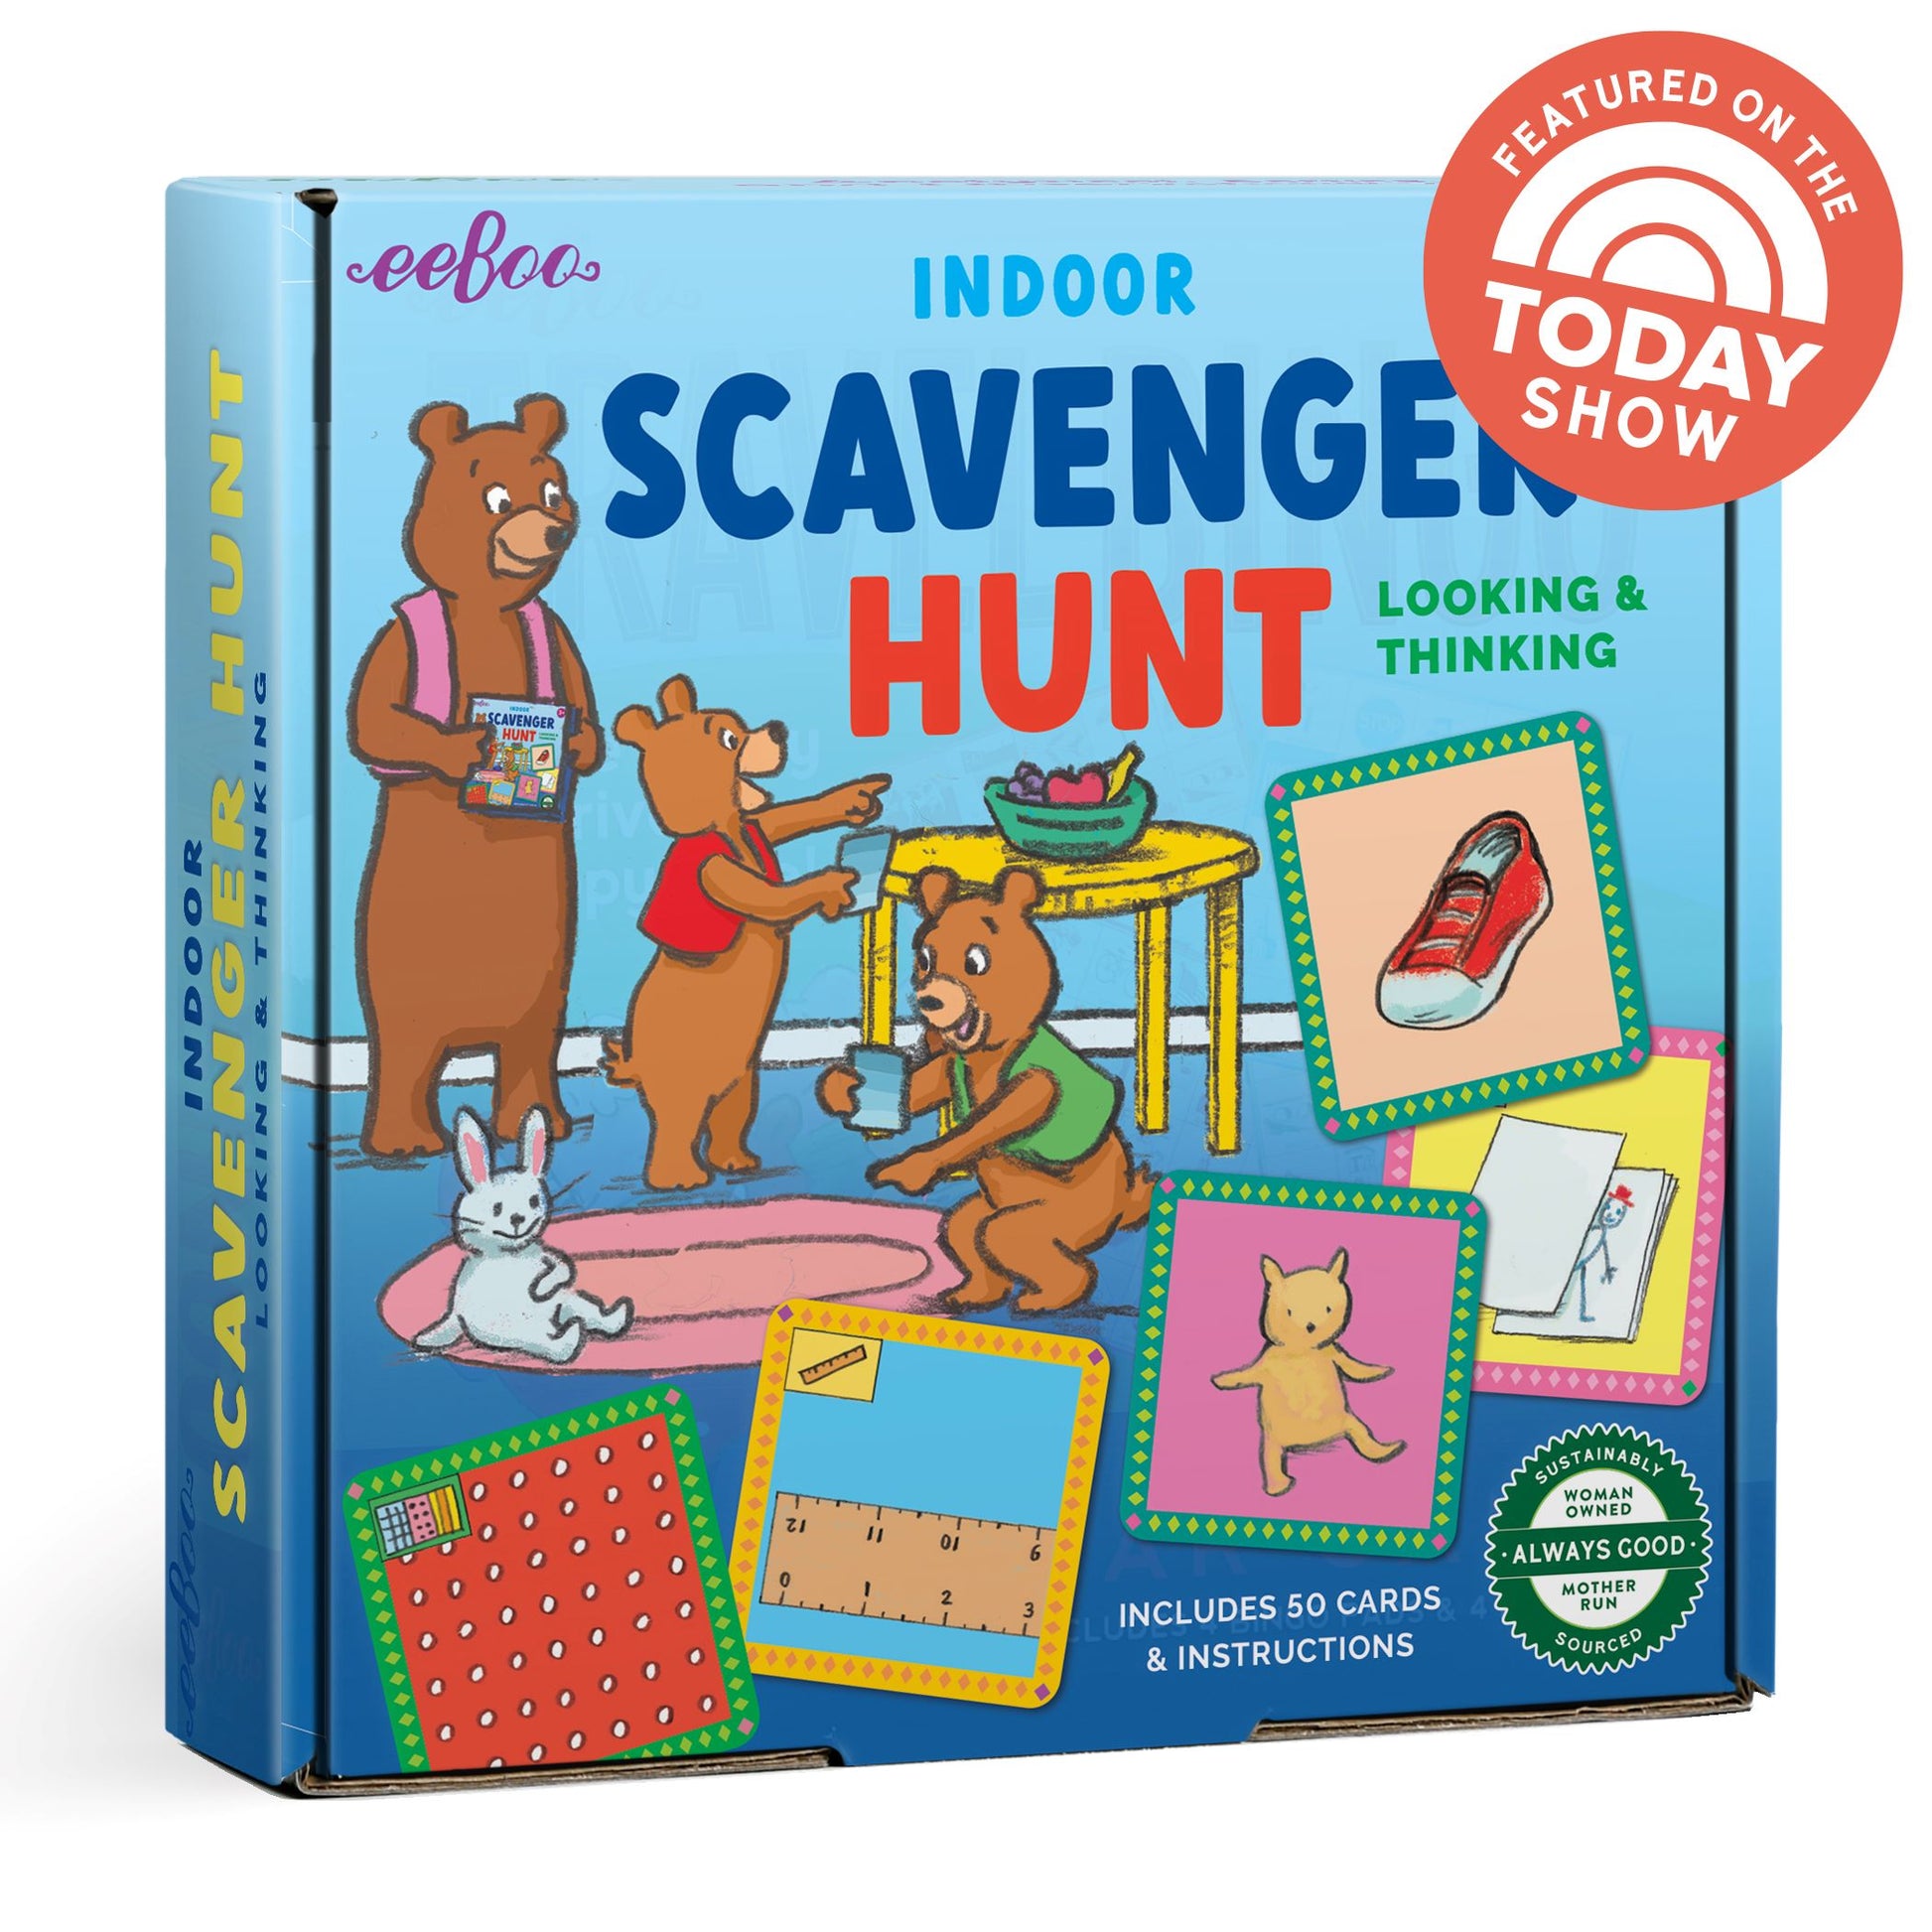 Indoor Scavenger Hunt Seek and Find Game by eeBoo for Kids Ages 3+ | Builds Observational and Analytical Skills